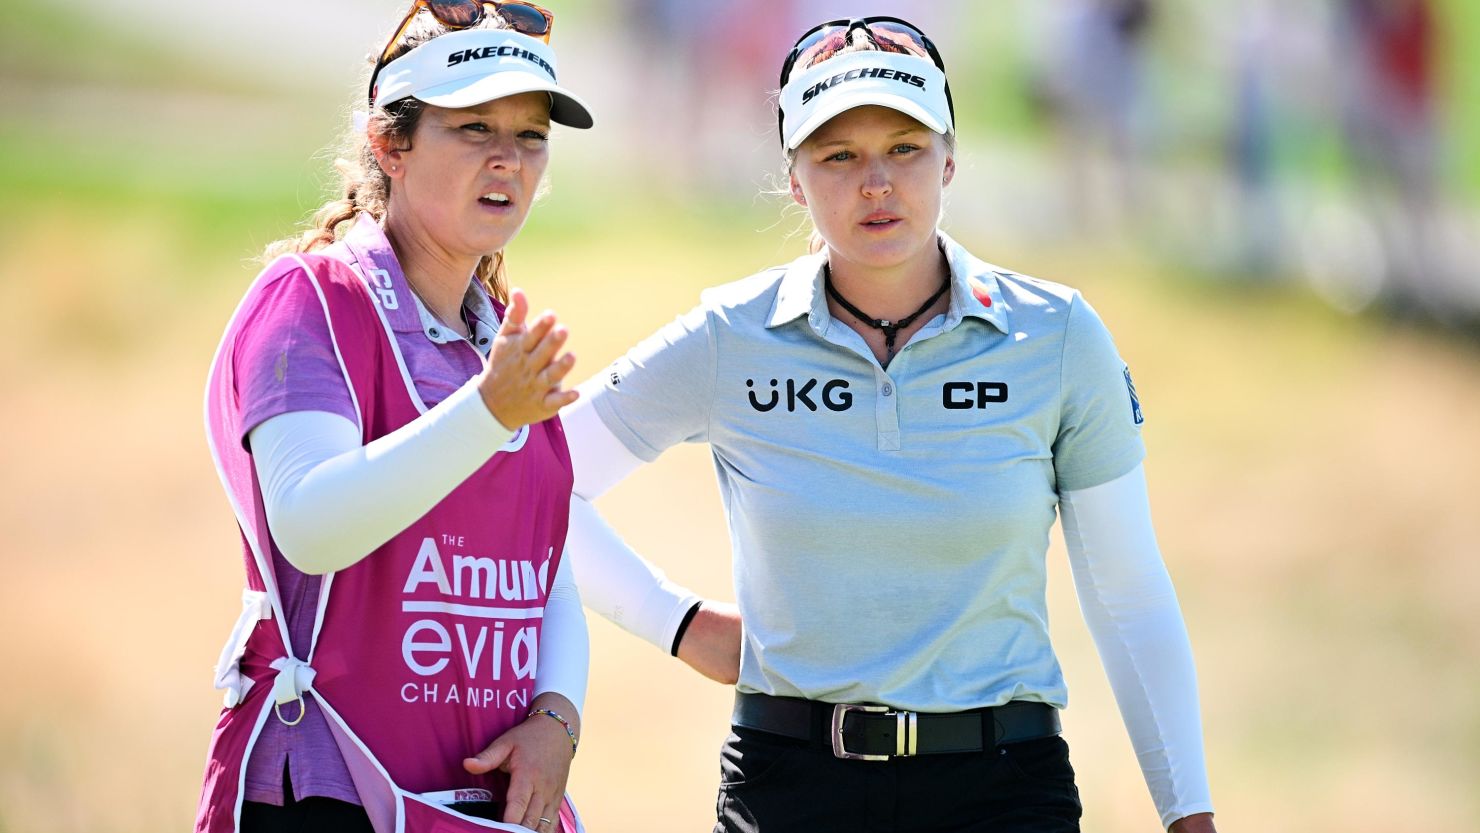  Brooke Henderson (R) looks on with her caddie, and sister, Brittany during the final day of the Evian Championship, on July 24, 2022 in Evian-les-Bains, France. 